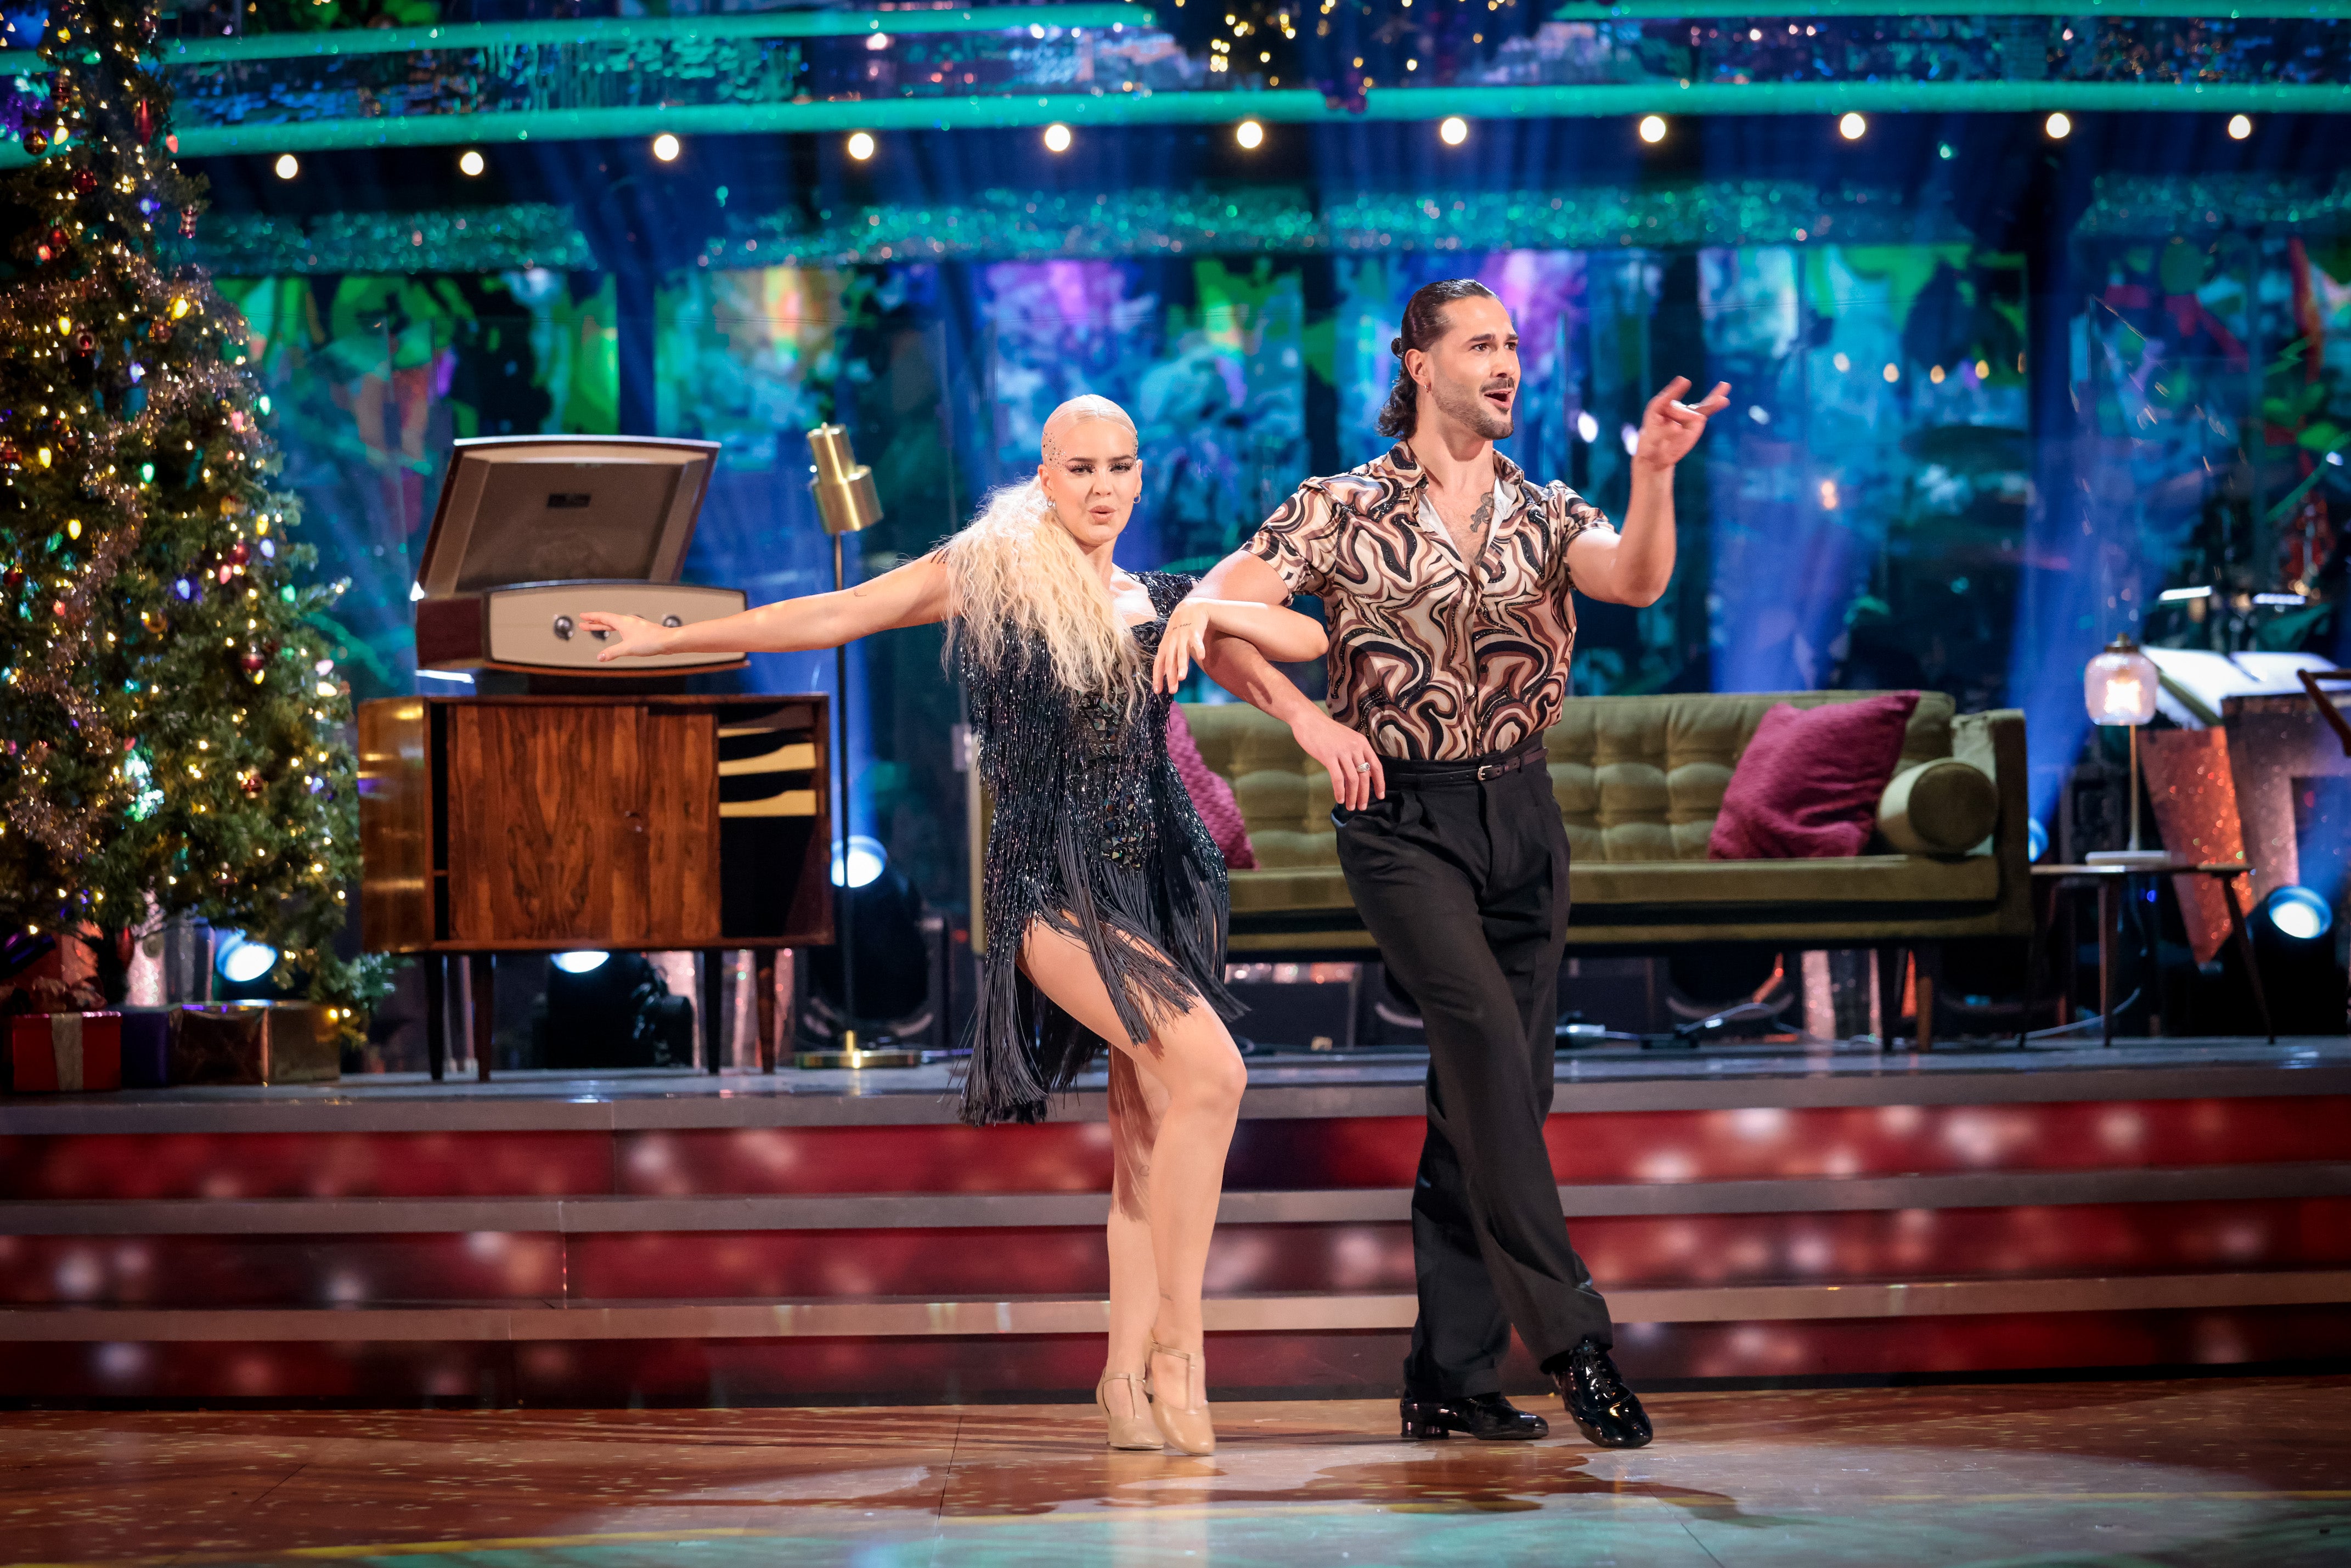 Strictly Come Dancing Christmas Special 2021 Picture Shows: Anne Marie, Graziano Di Prima – (C) BBC – Photographer: Guy Levy